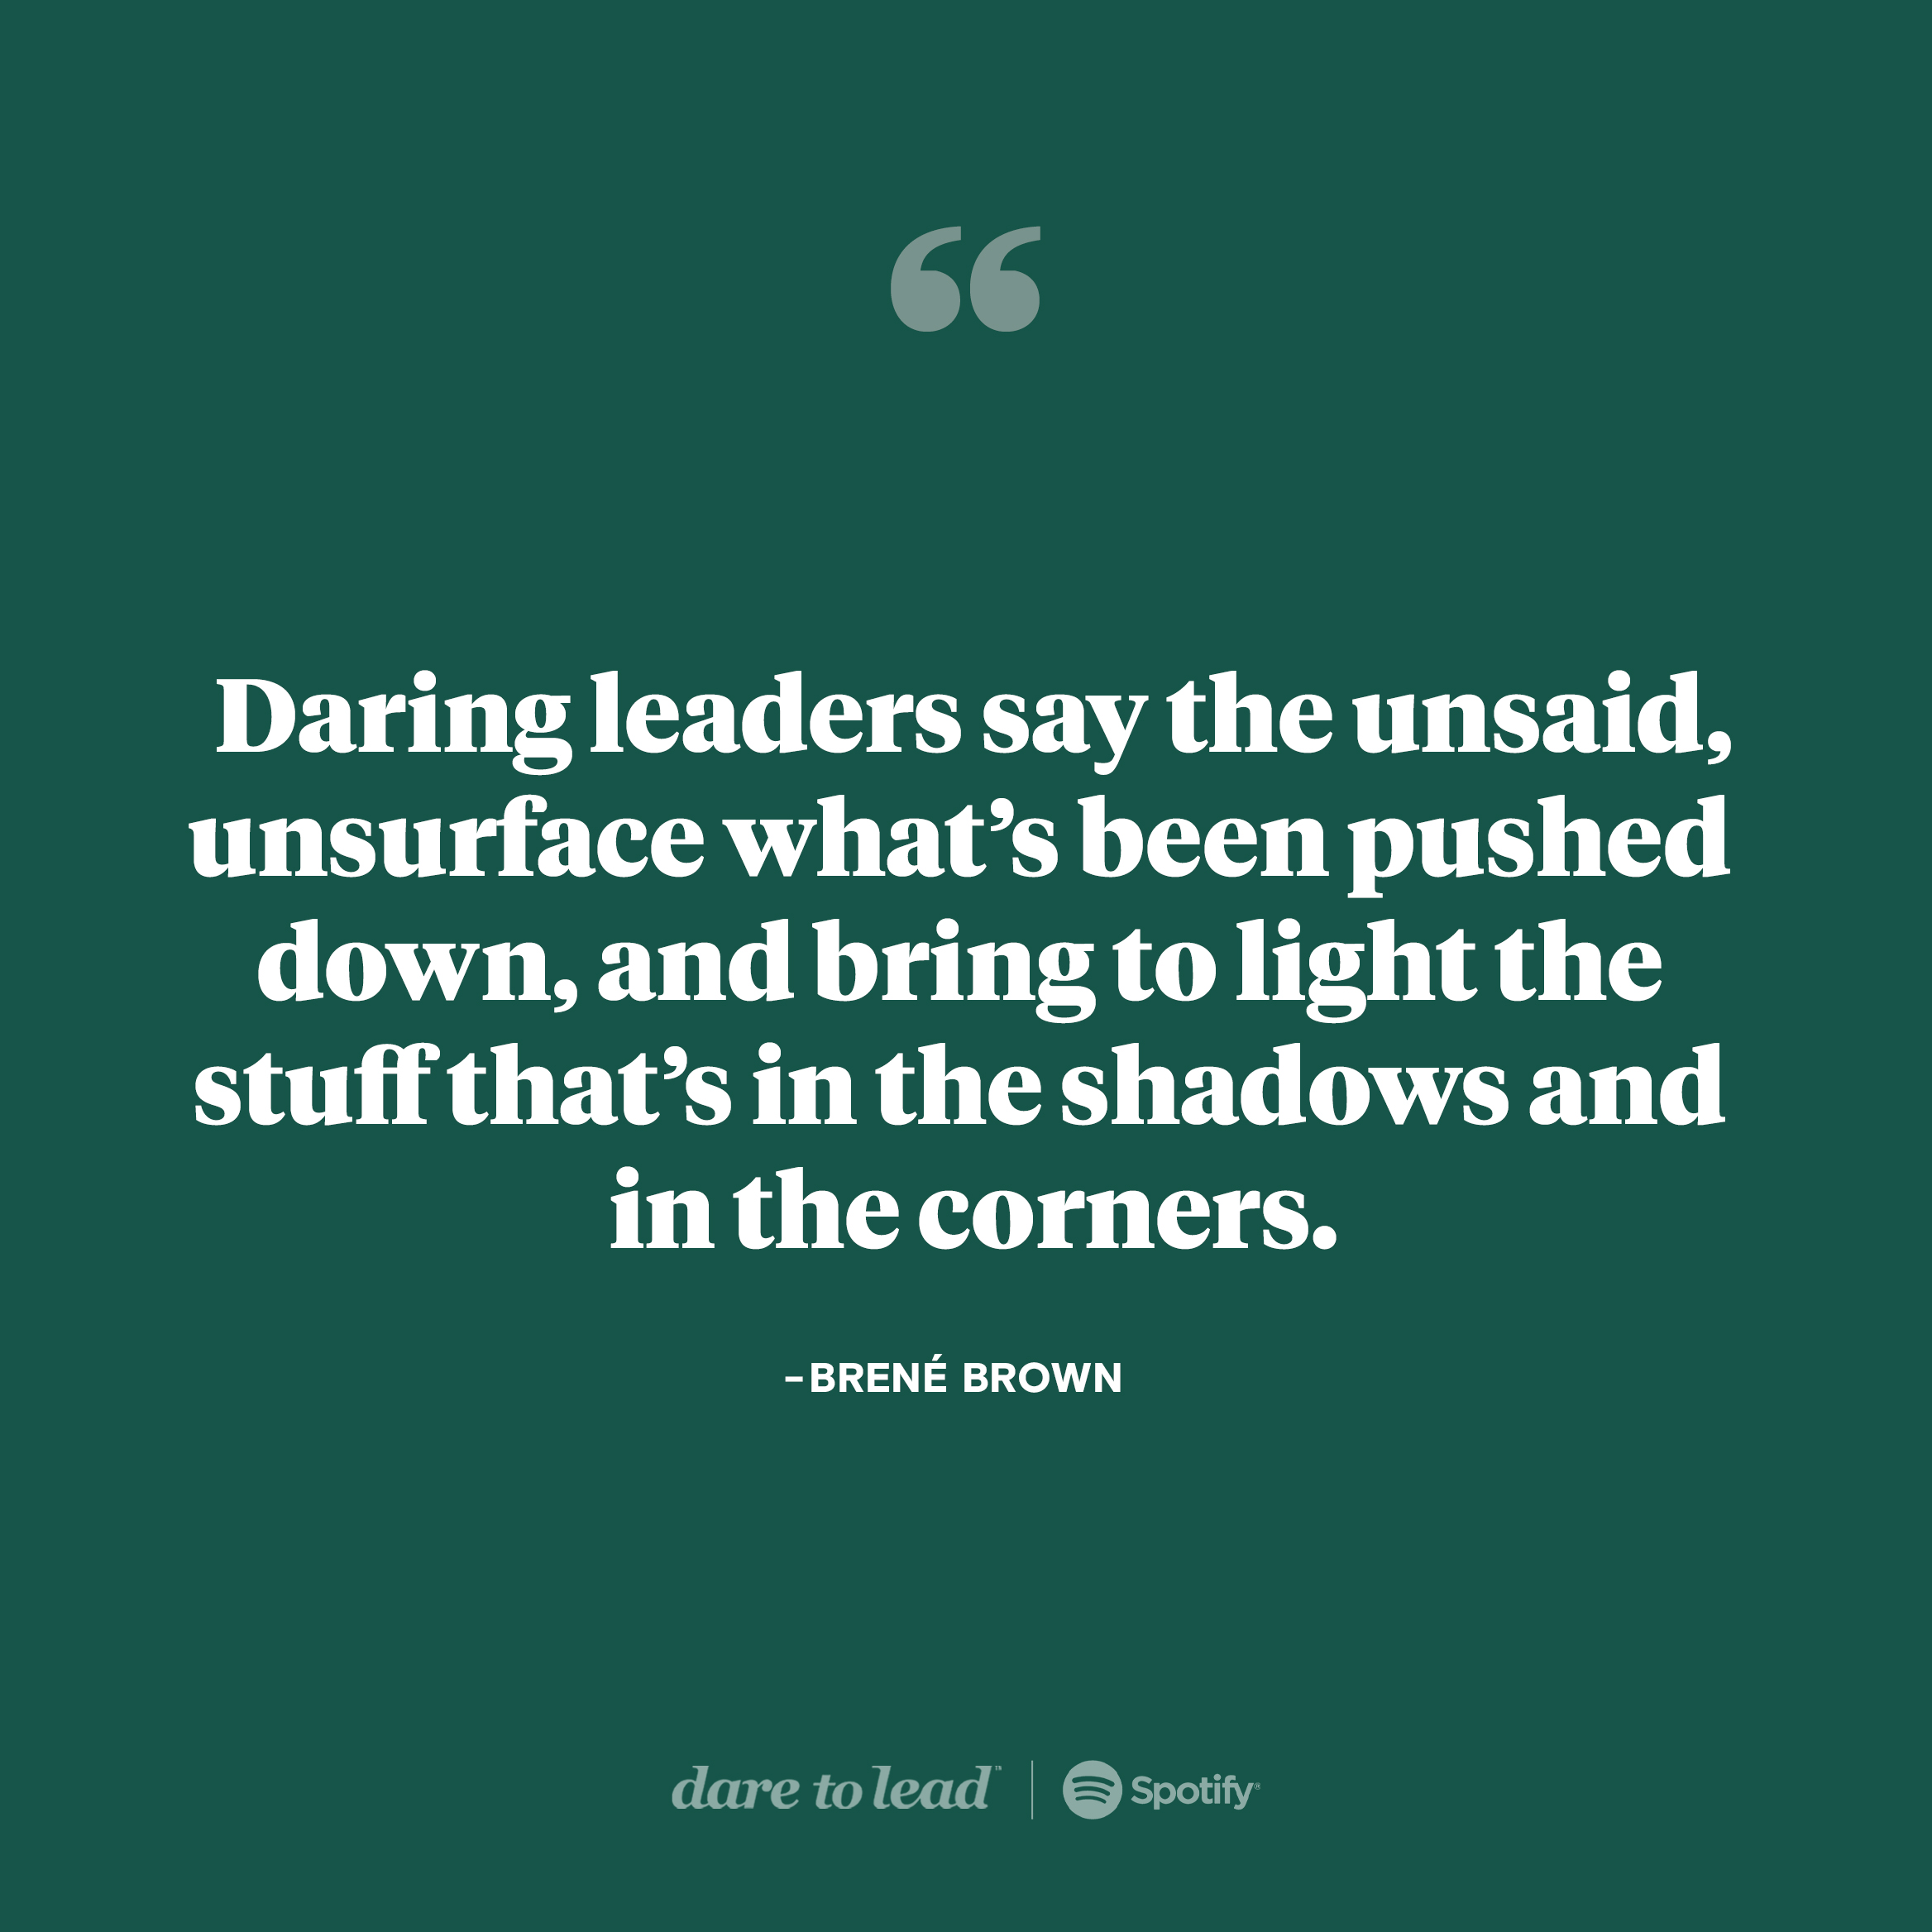 Daring leaders say the unsaid, unsurface what's been pushed down, and bring to light the stuff that's in the shadows and in the corners. — Brene Brown. Listen to the latest Dare to Lead episode on Spotify